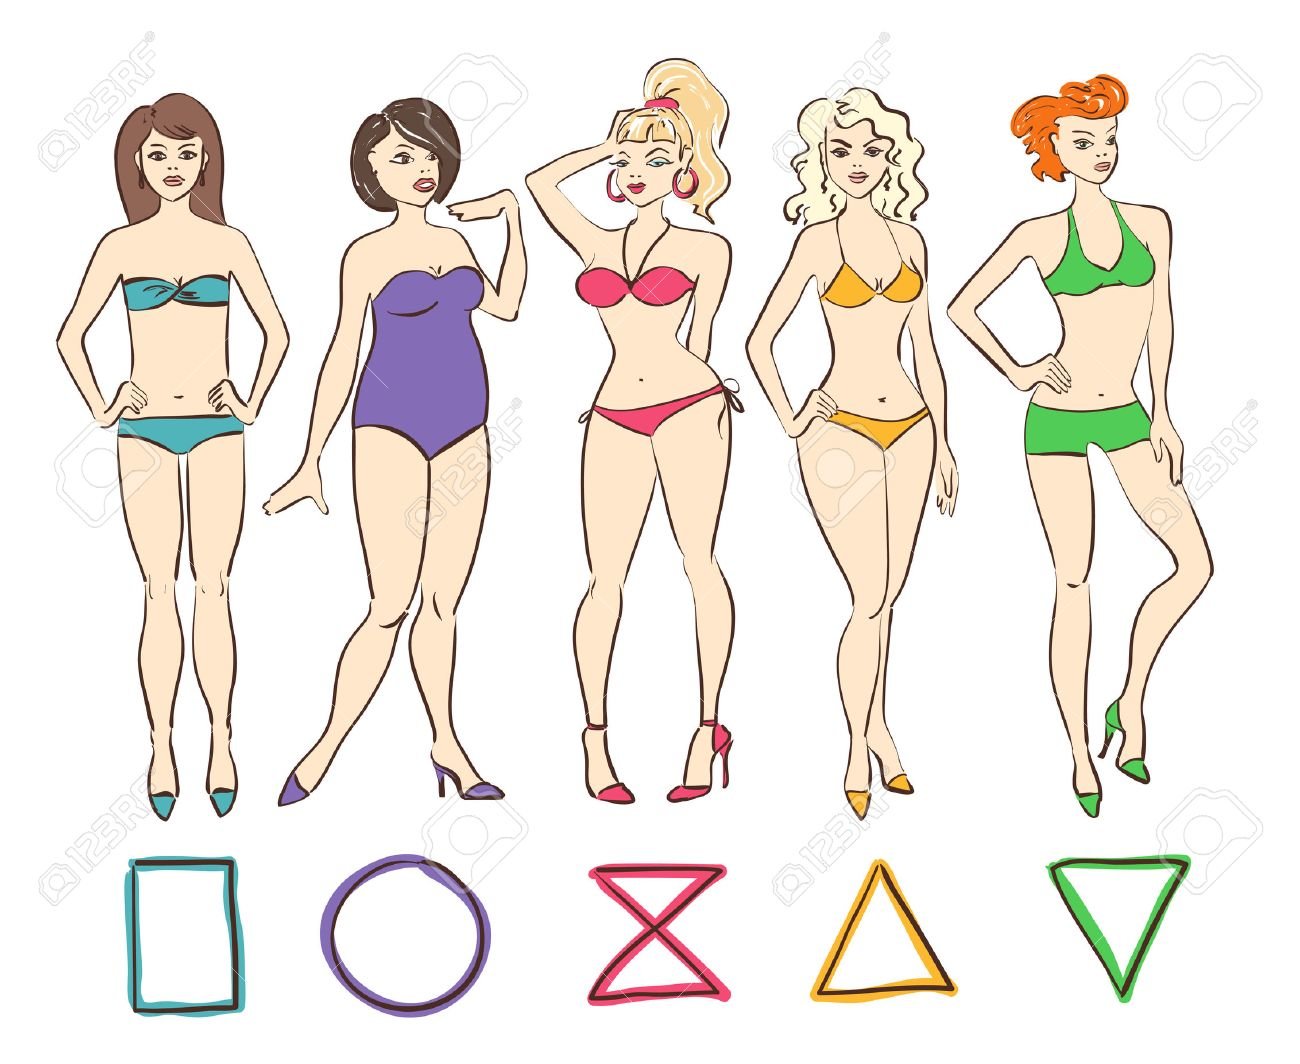 body-shape-types round-apple-triangle-pear-hourglass-rectangle.jpg